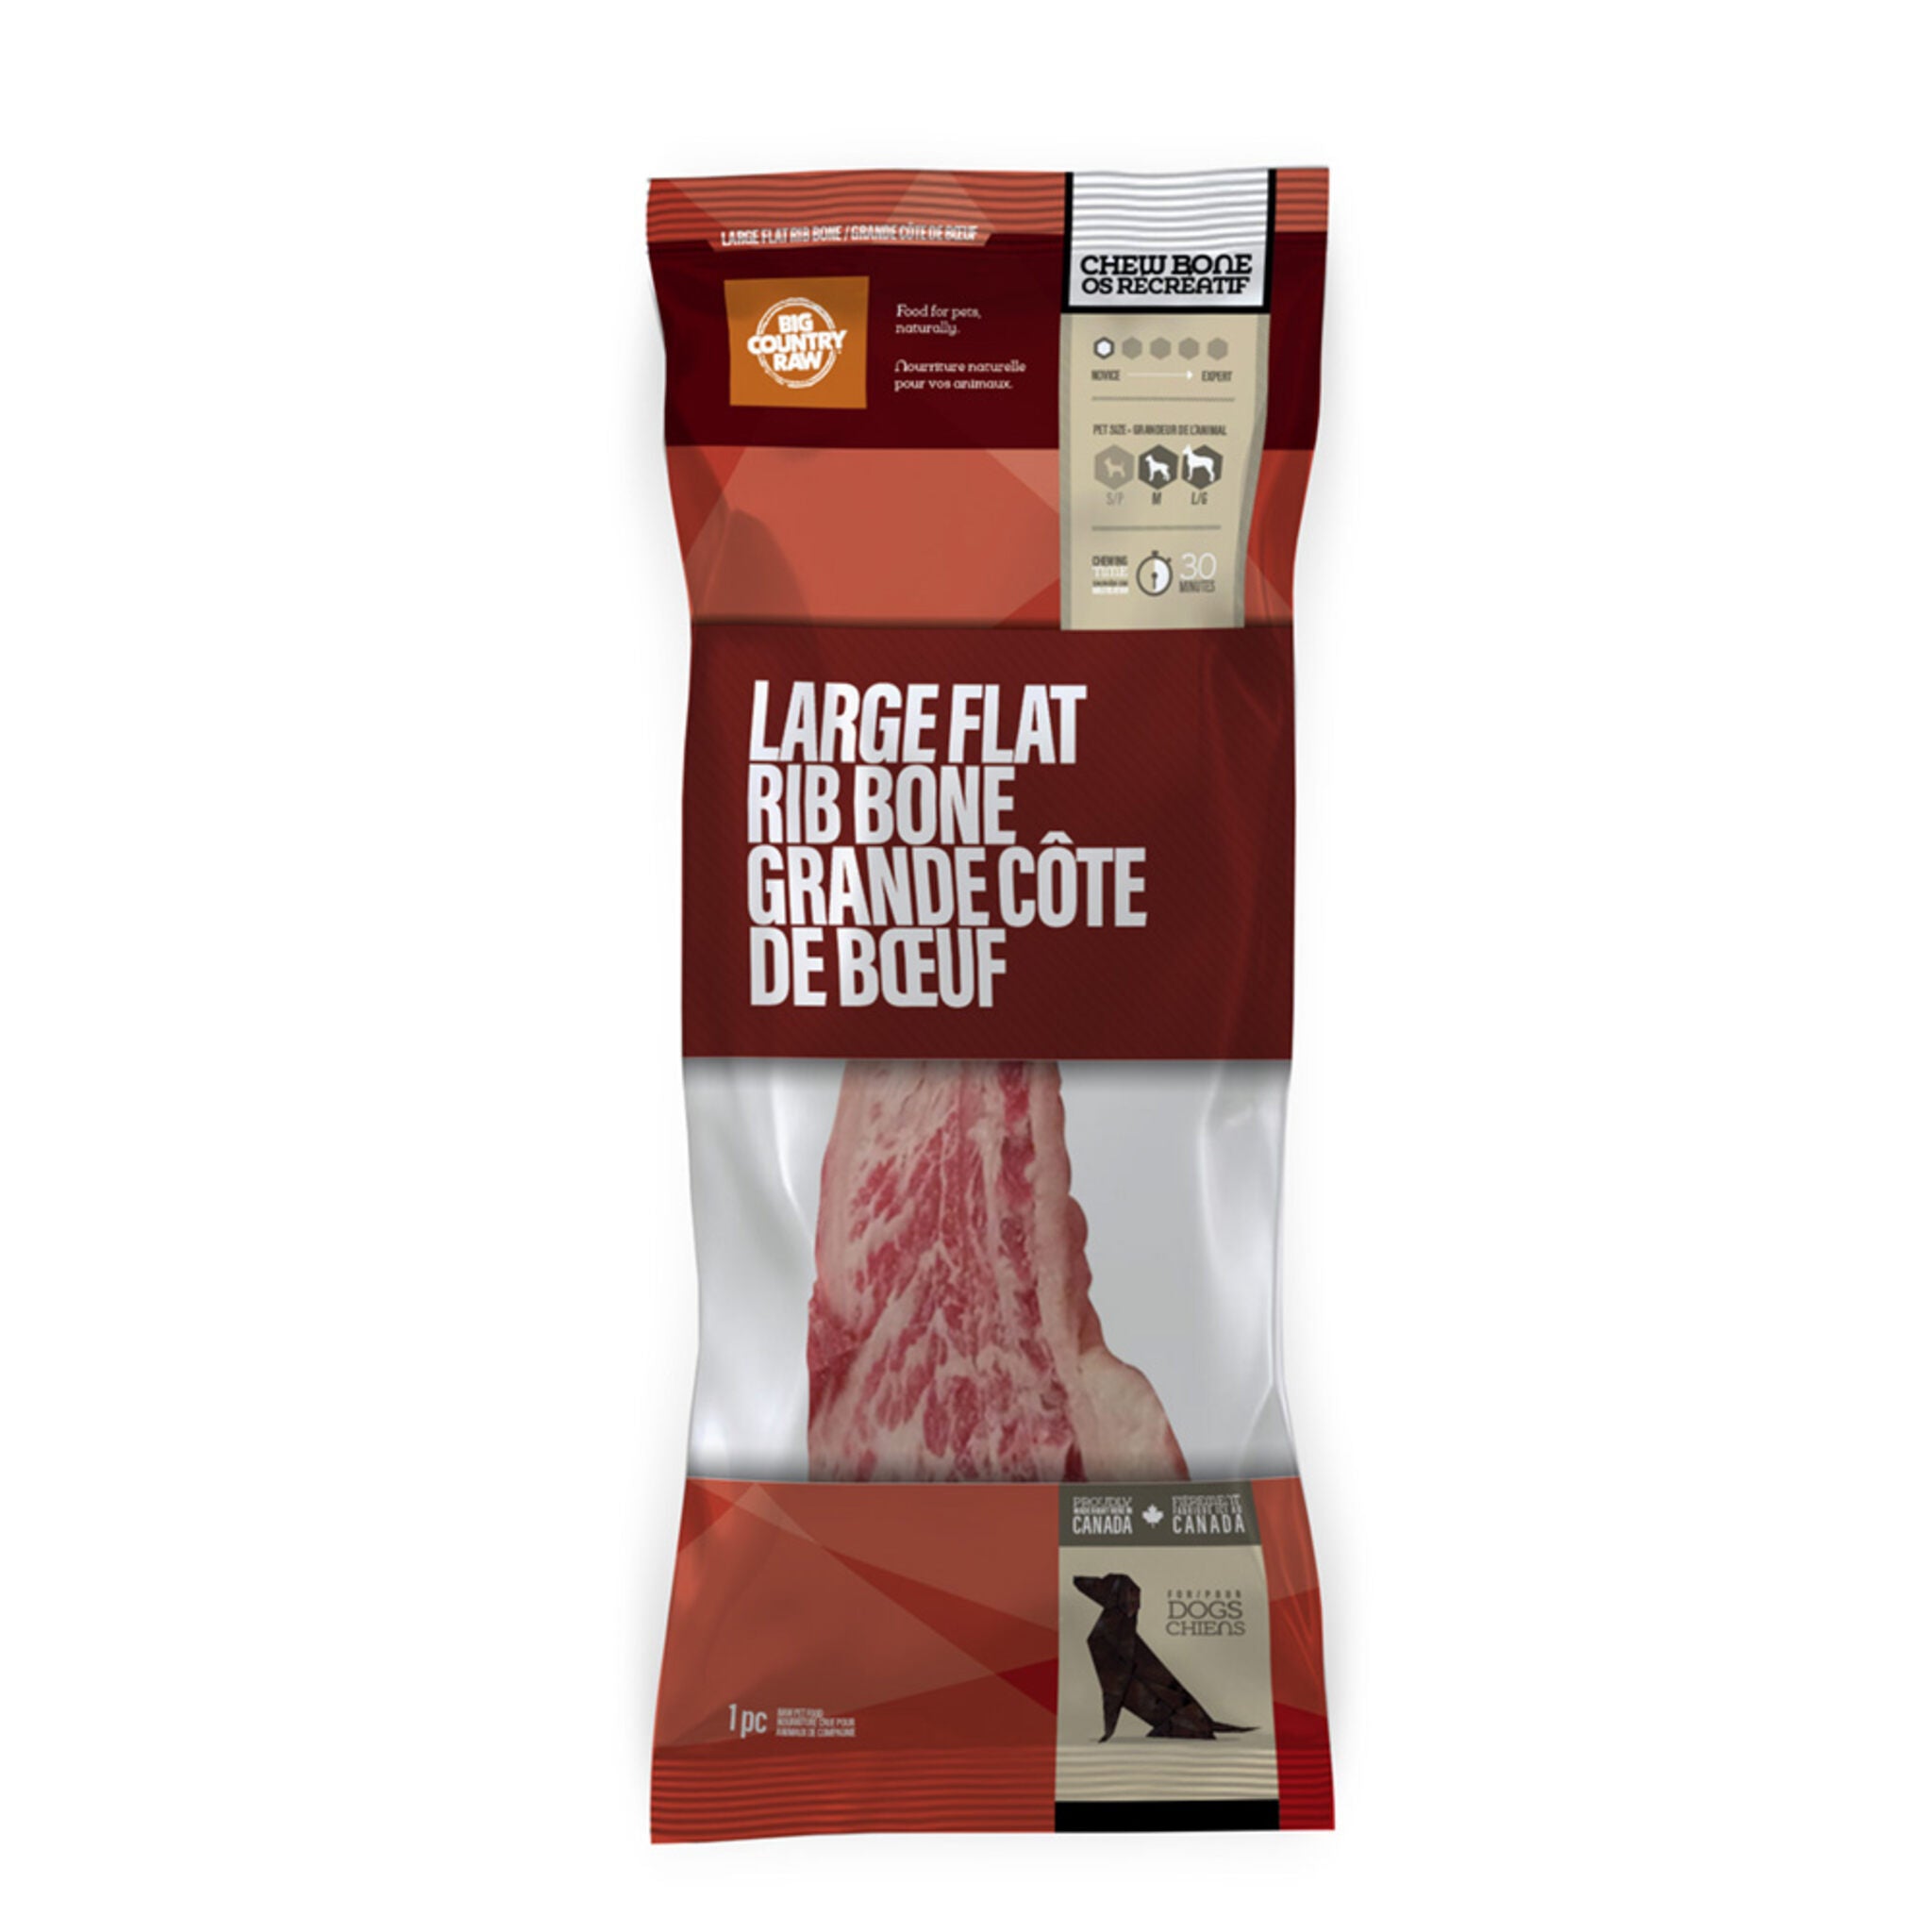 A Big Country Raw Large Flat Rib bone, 1 pc, Medium & Large dog treat, roughly 30 minutes chewing time, requires freezing.